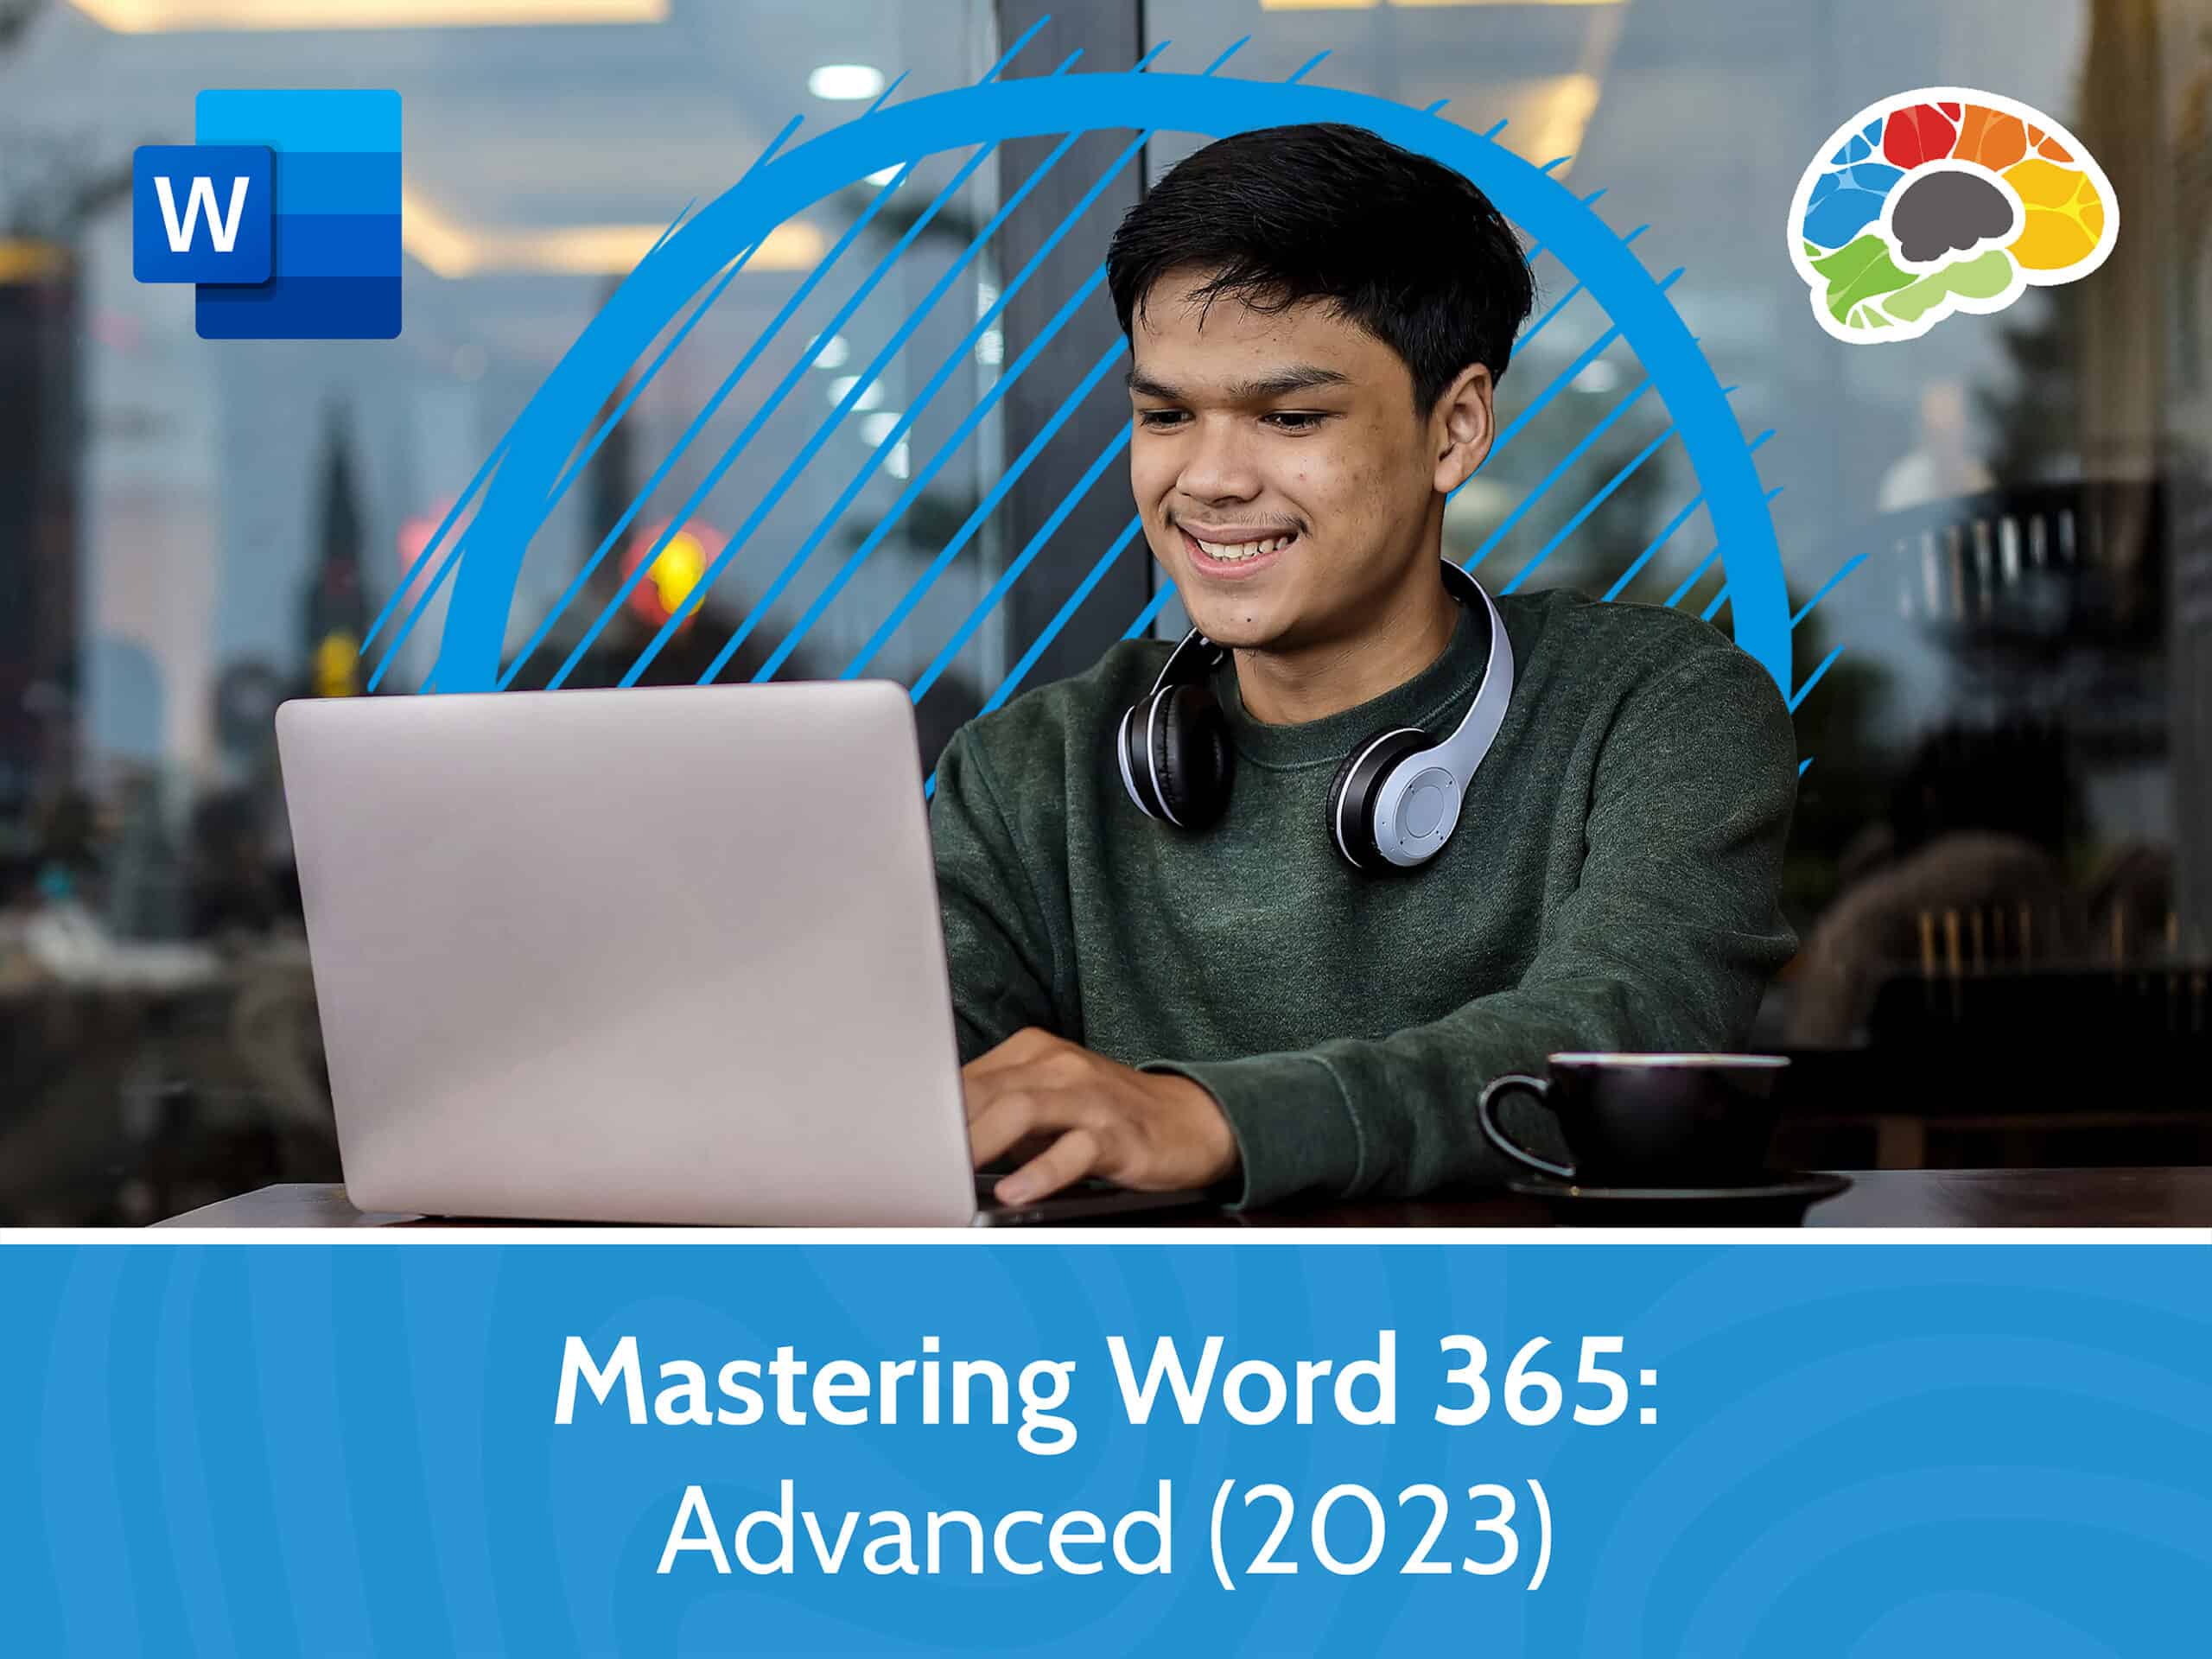 Mastering Word 365 Advanced 2023 scaled